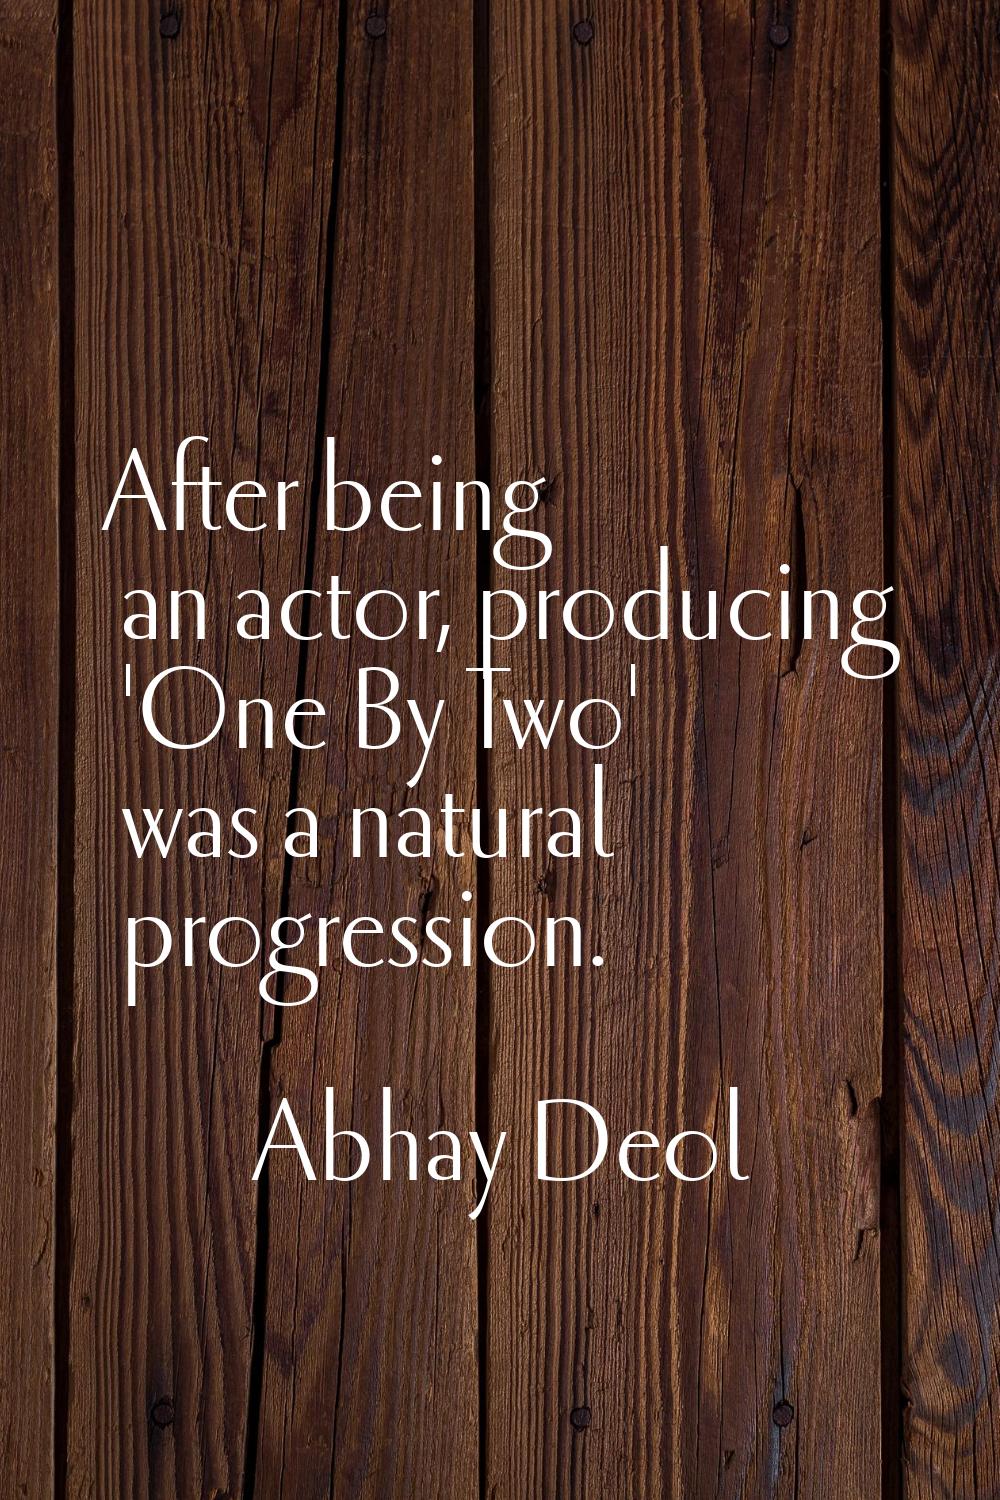 After being an actor, producing 'One By Two' was a natural progression.